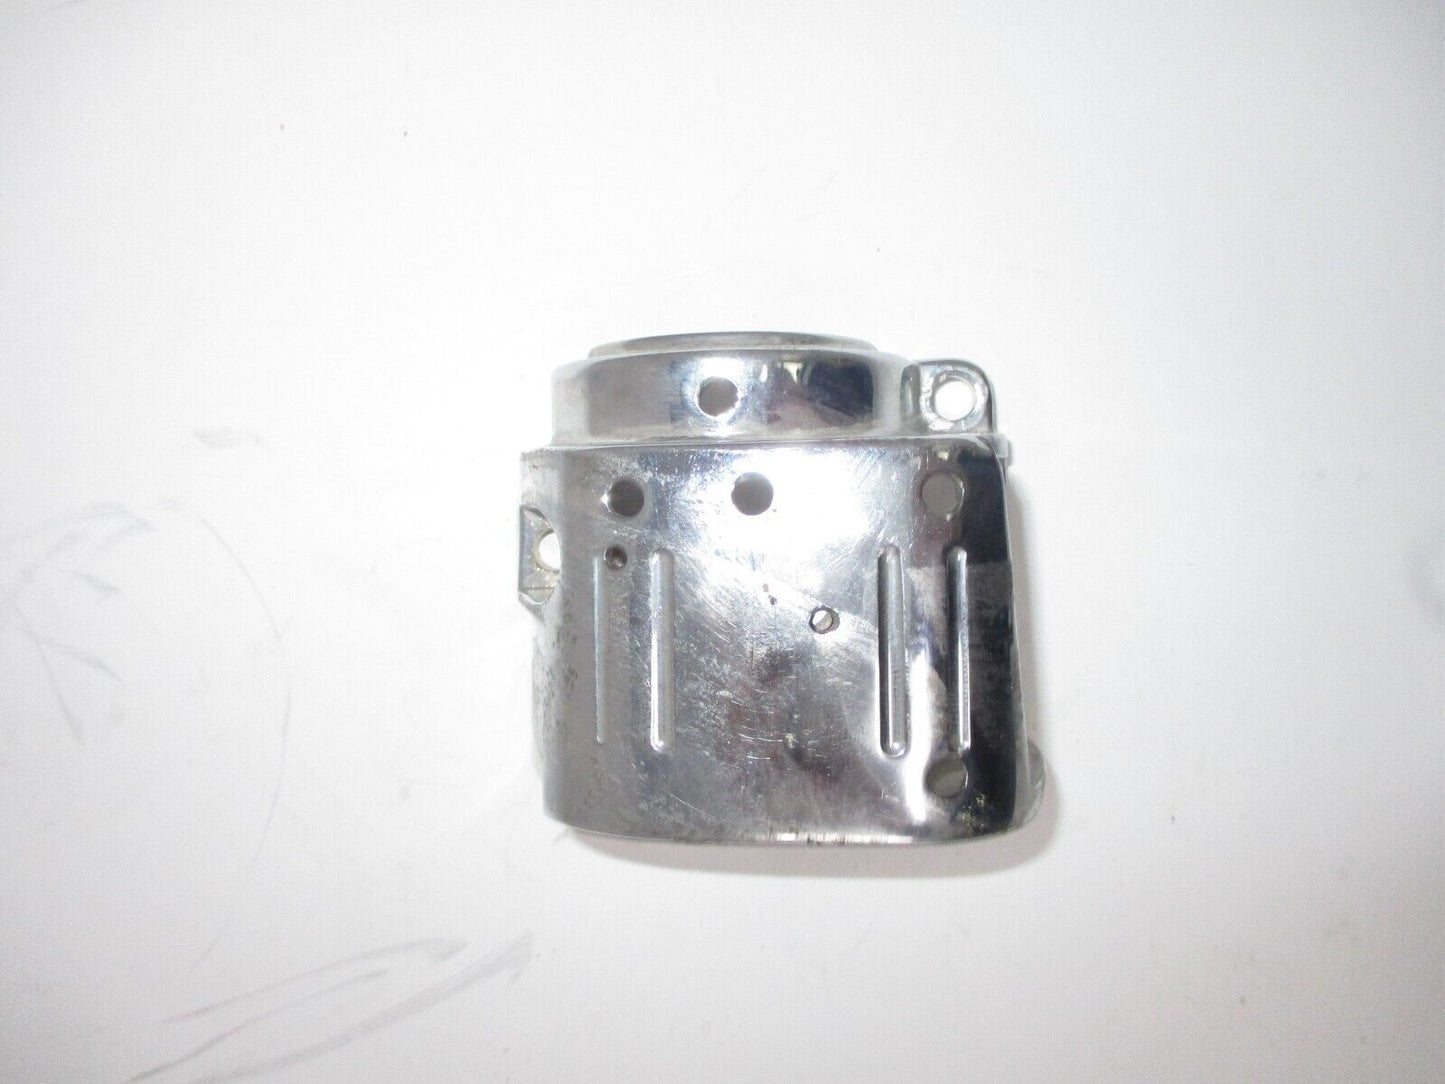 Lower Left Switch Housing Style Fits Harley- Davidson '82-'95